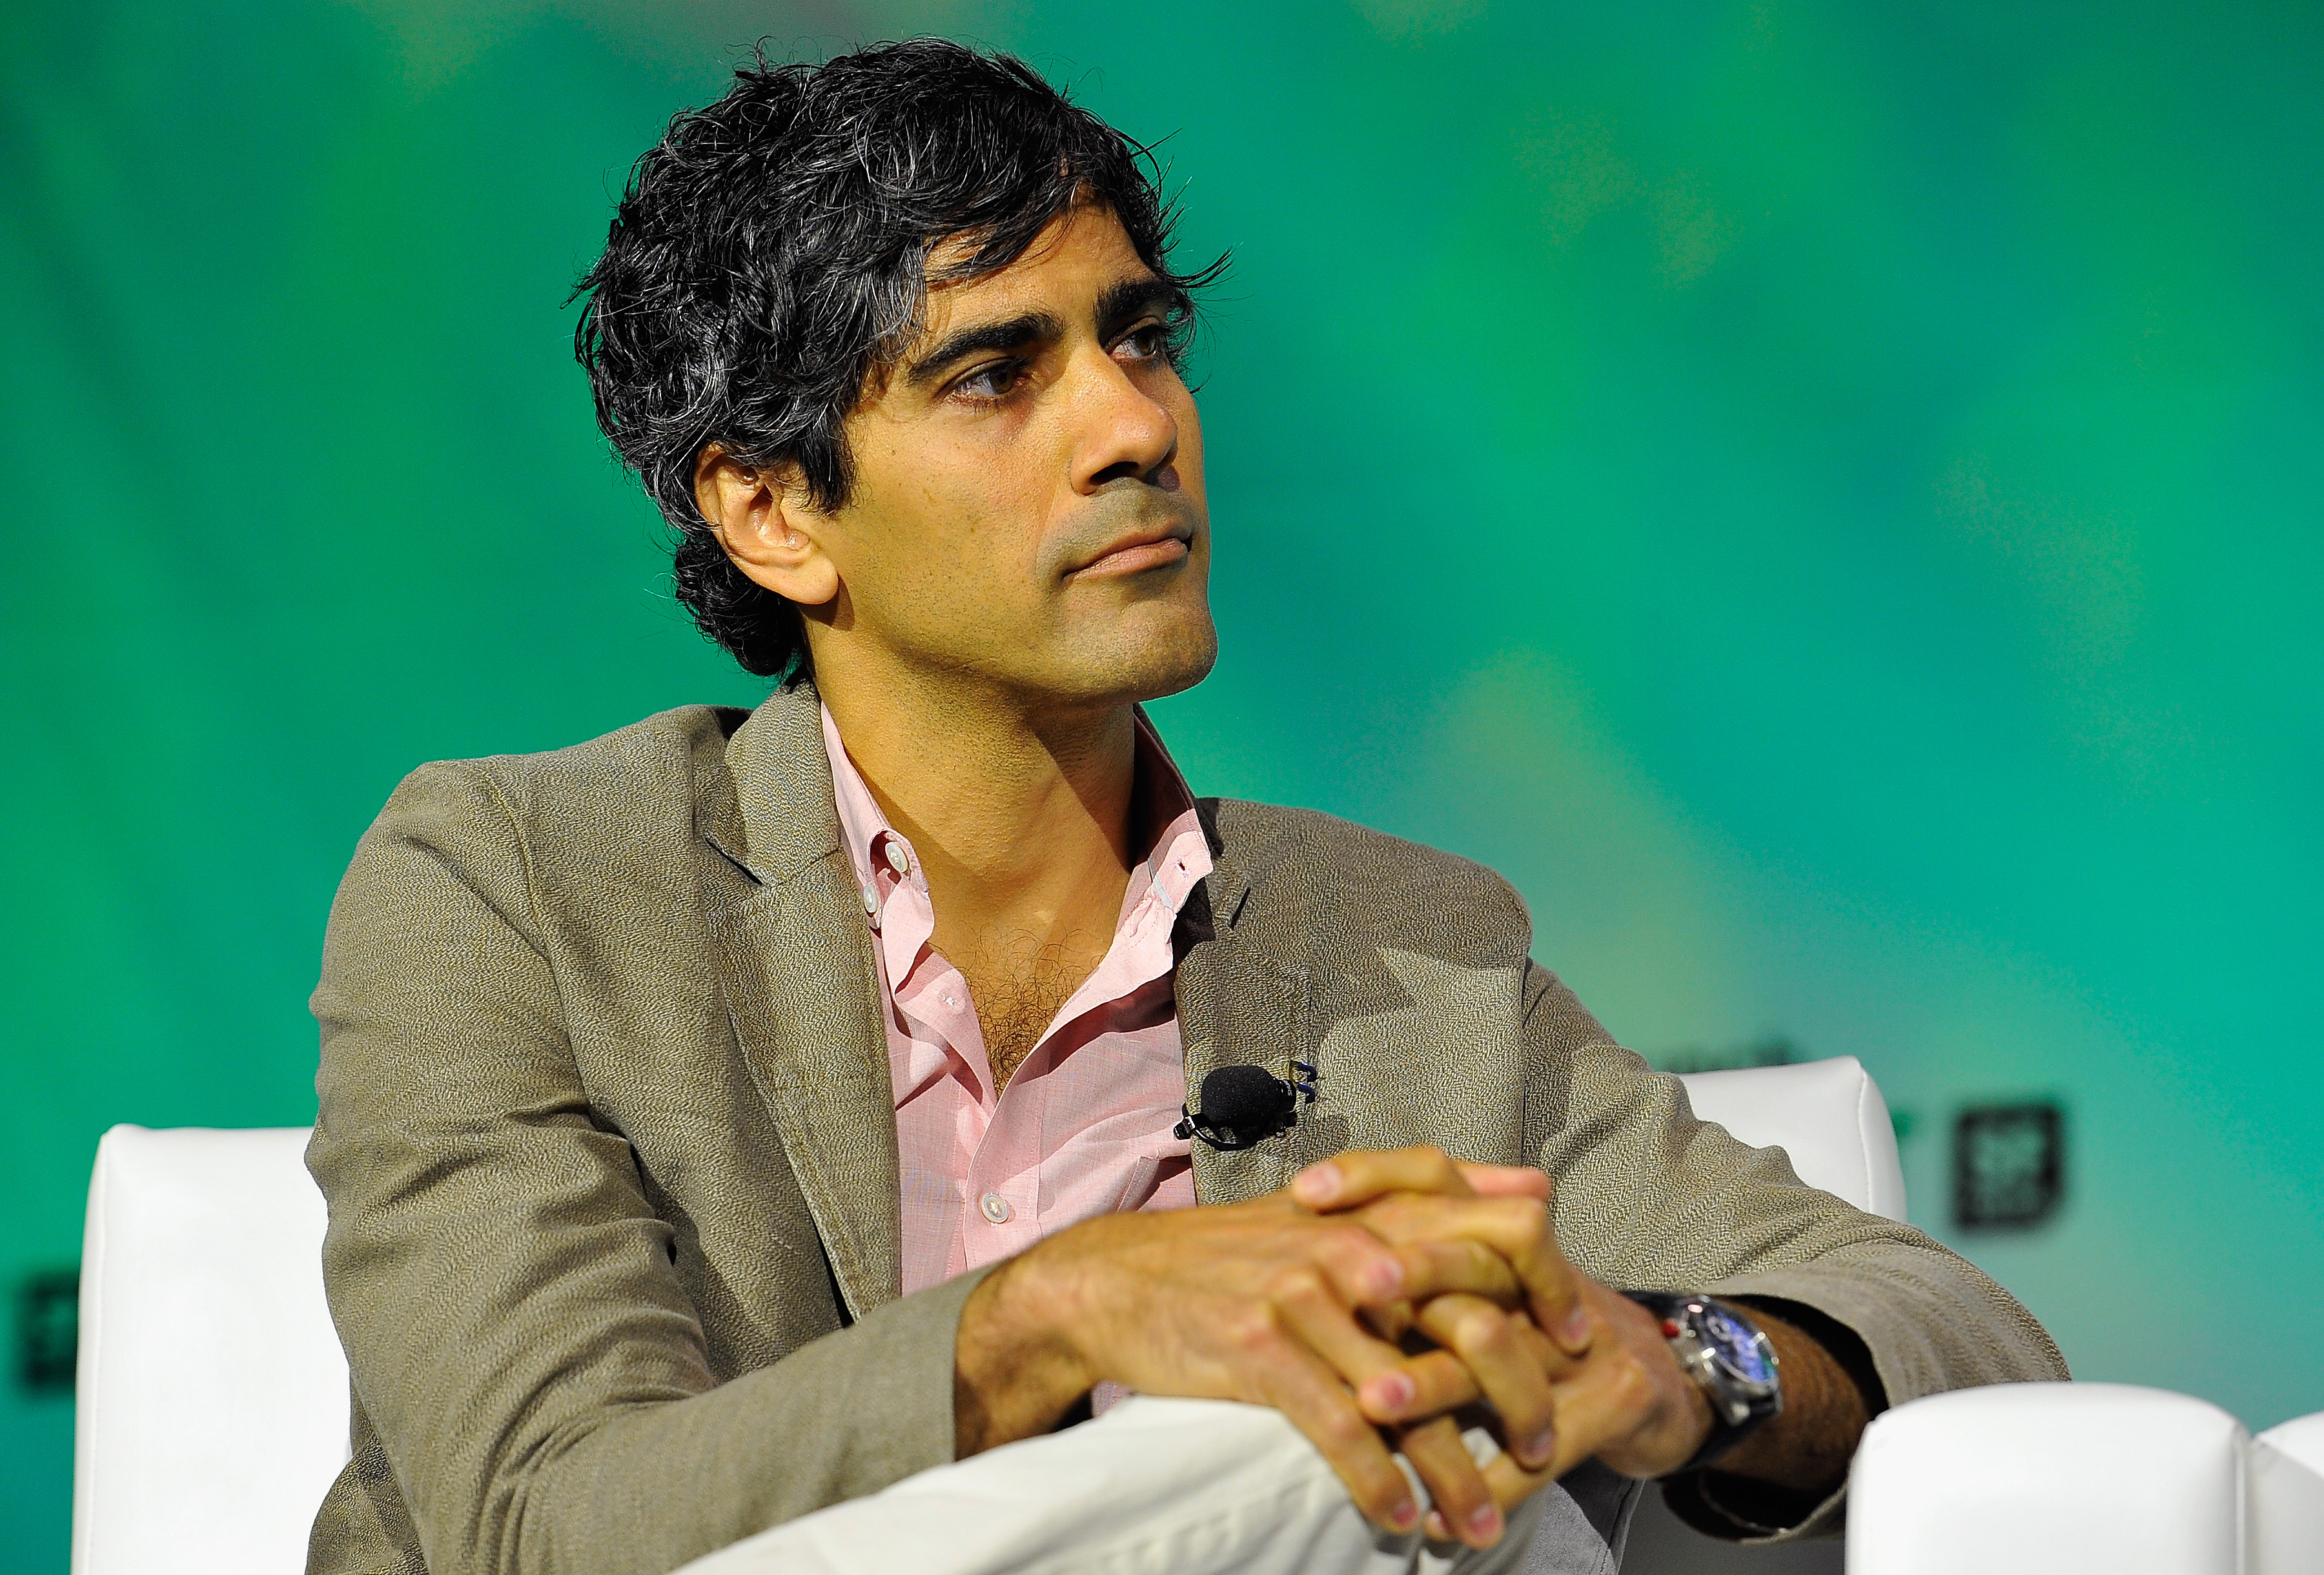 Jeremy Stoppelman at TechCrunch Disrupt in San Francisco on Sept. 9, 2014.